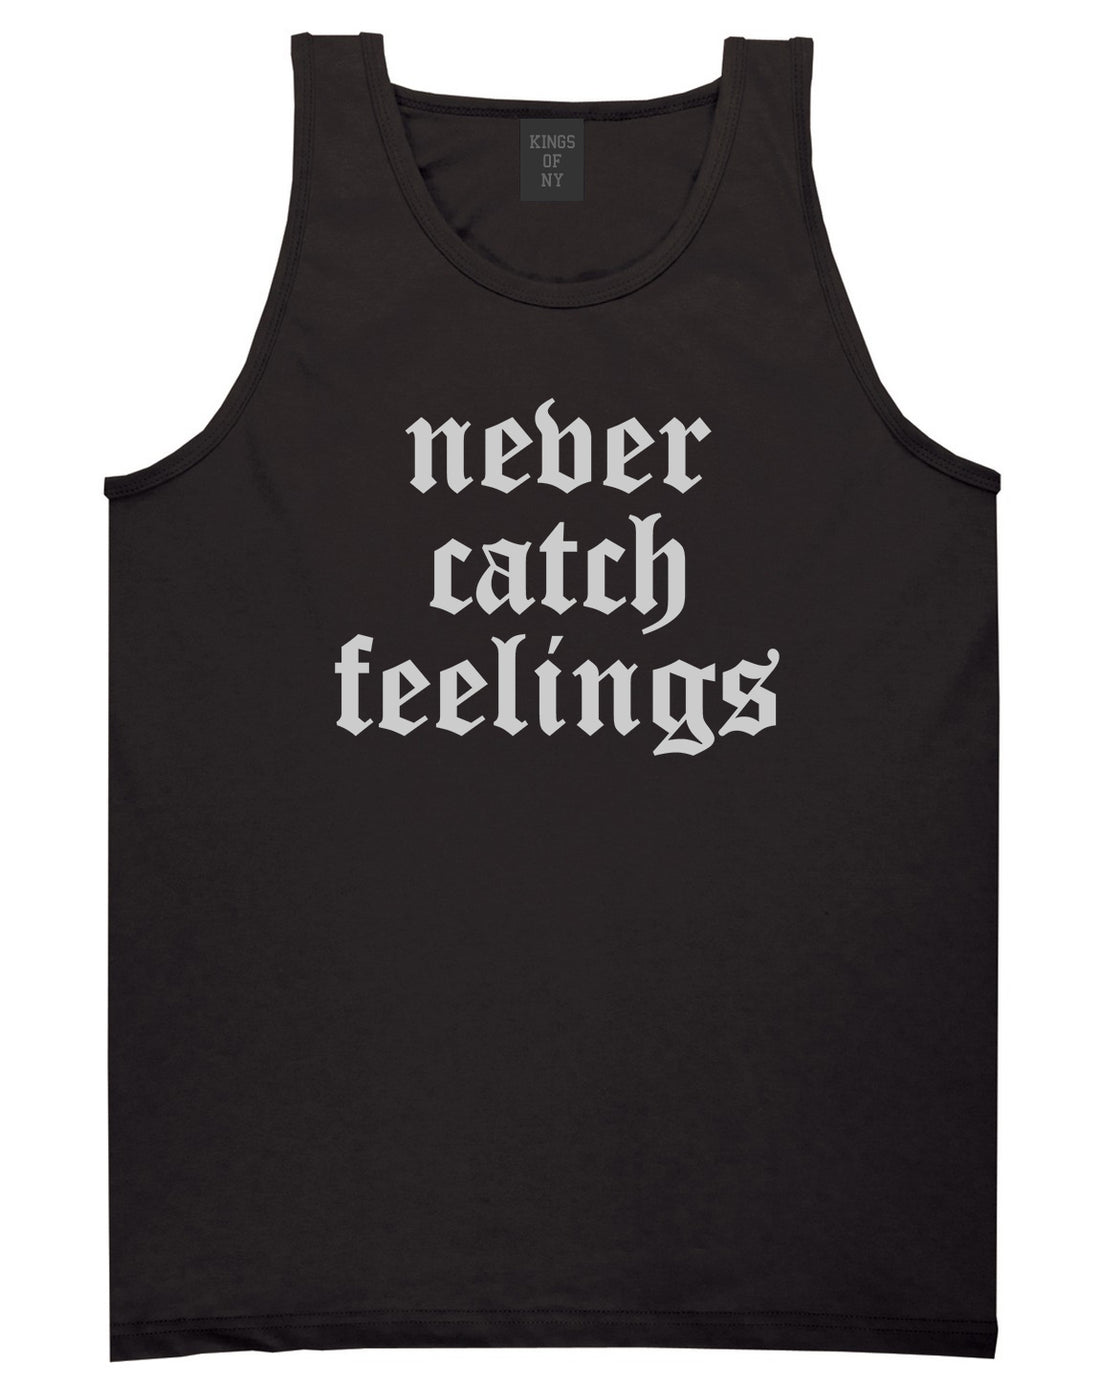 Never Catch Feelings Mens Tank Top Shirt Black by Kings Of NY